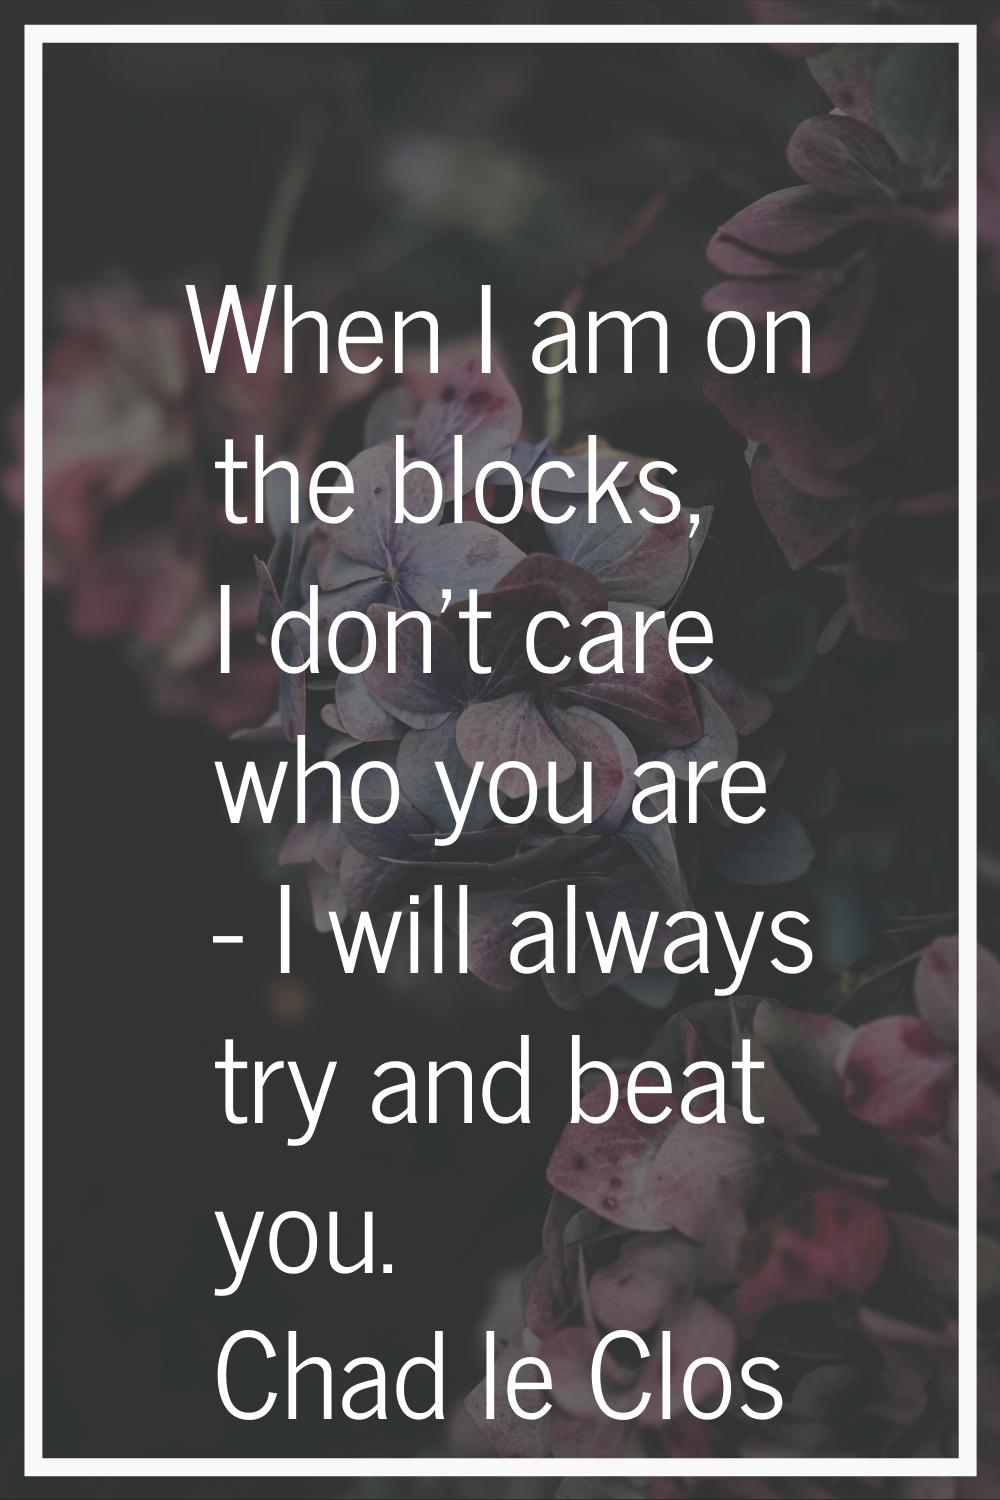 When I am on the blocks, I don't care who you are - I will always try and beat you.